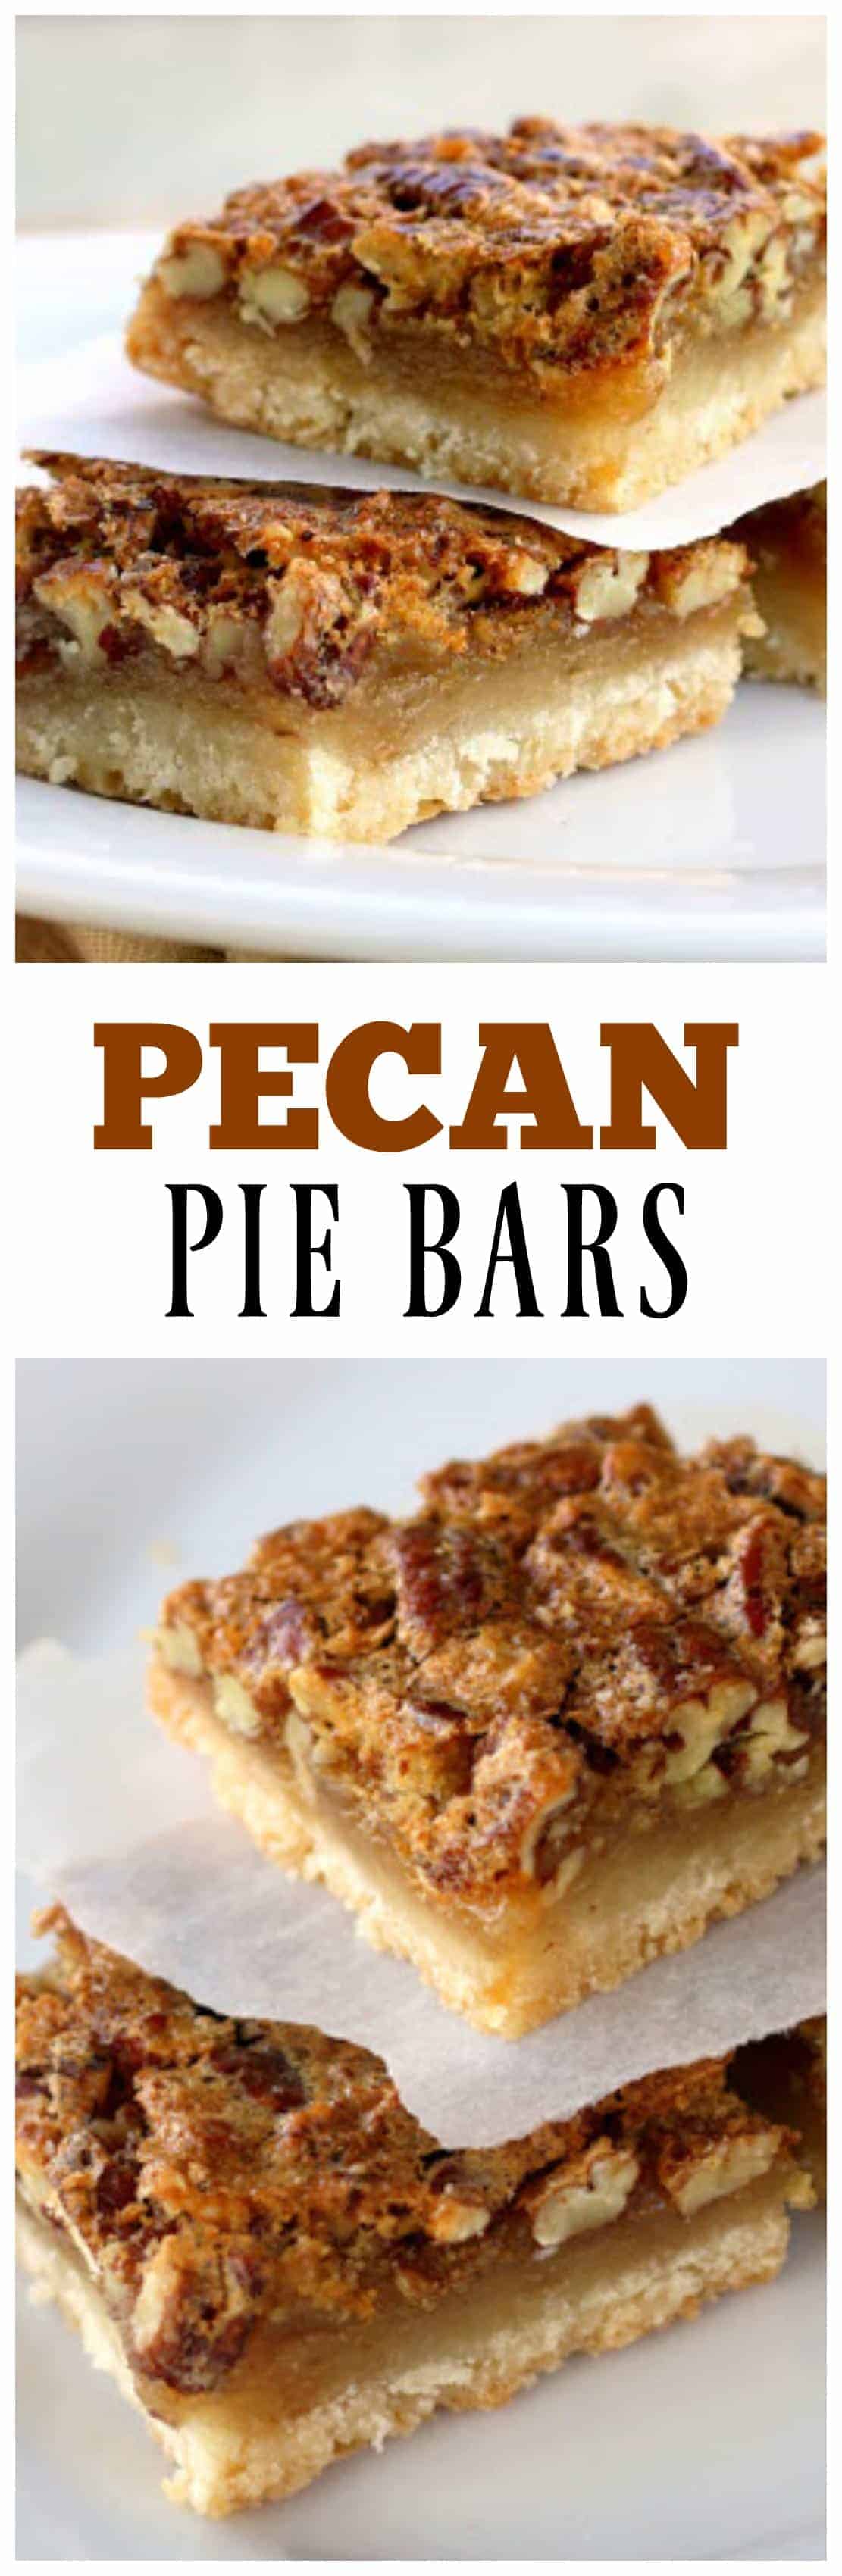 Pecan Pie Bars - just like the pie but in easy to eat bar form! #pecan #pie #bars #dessert #thanksgiving